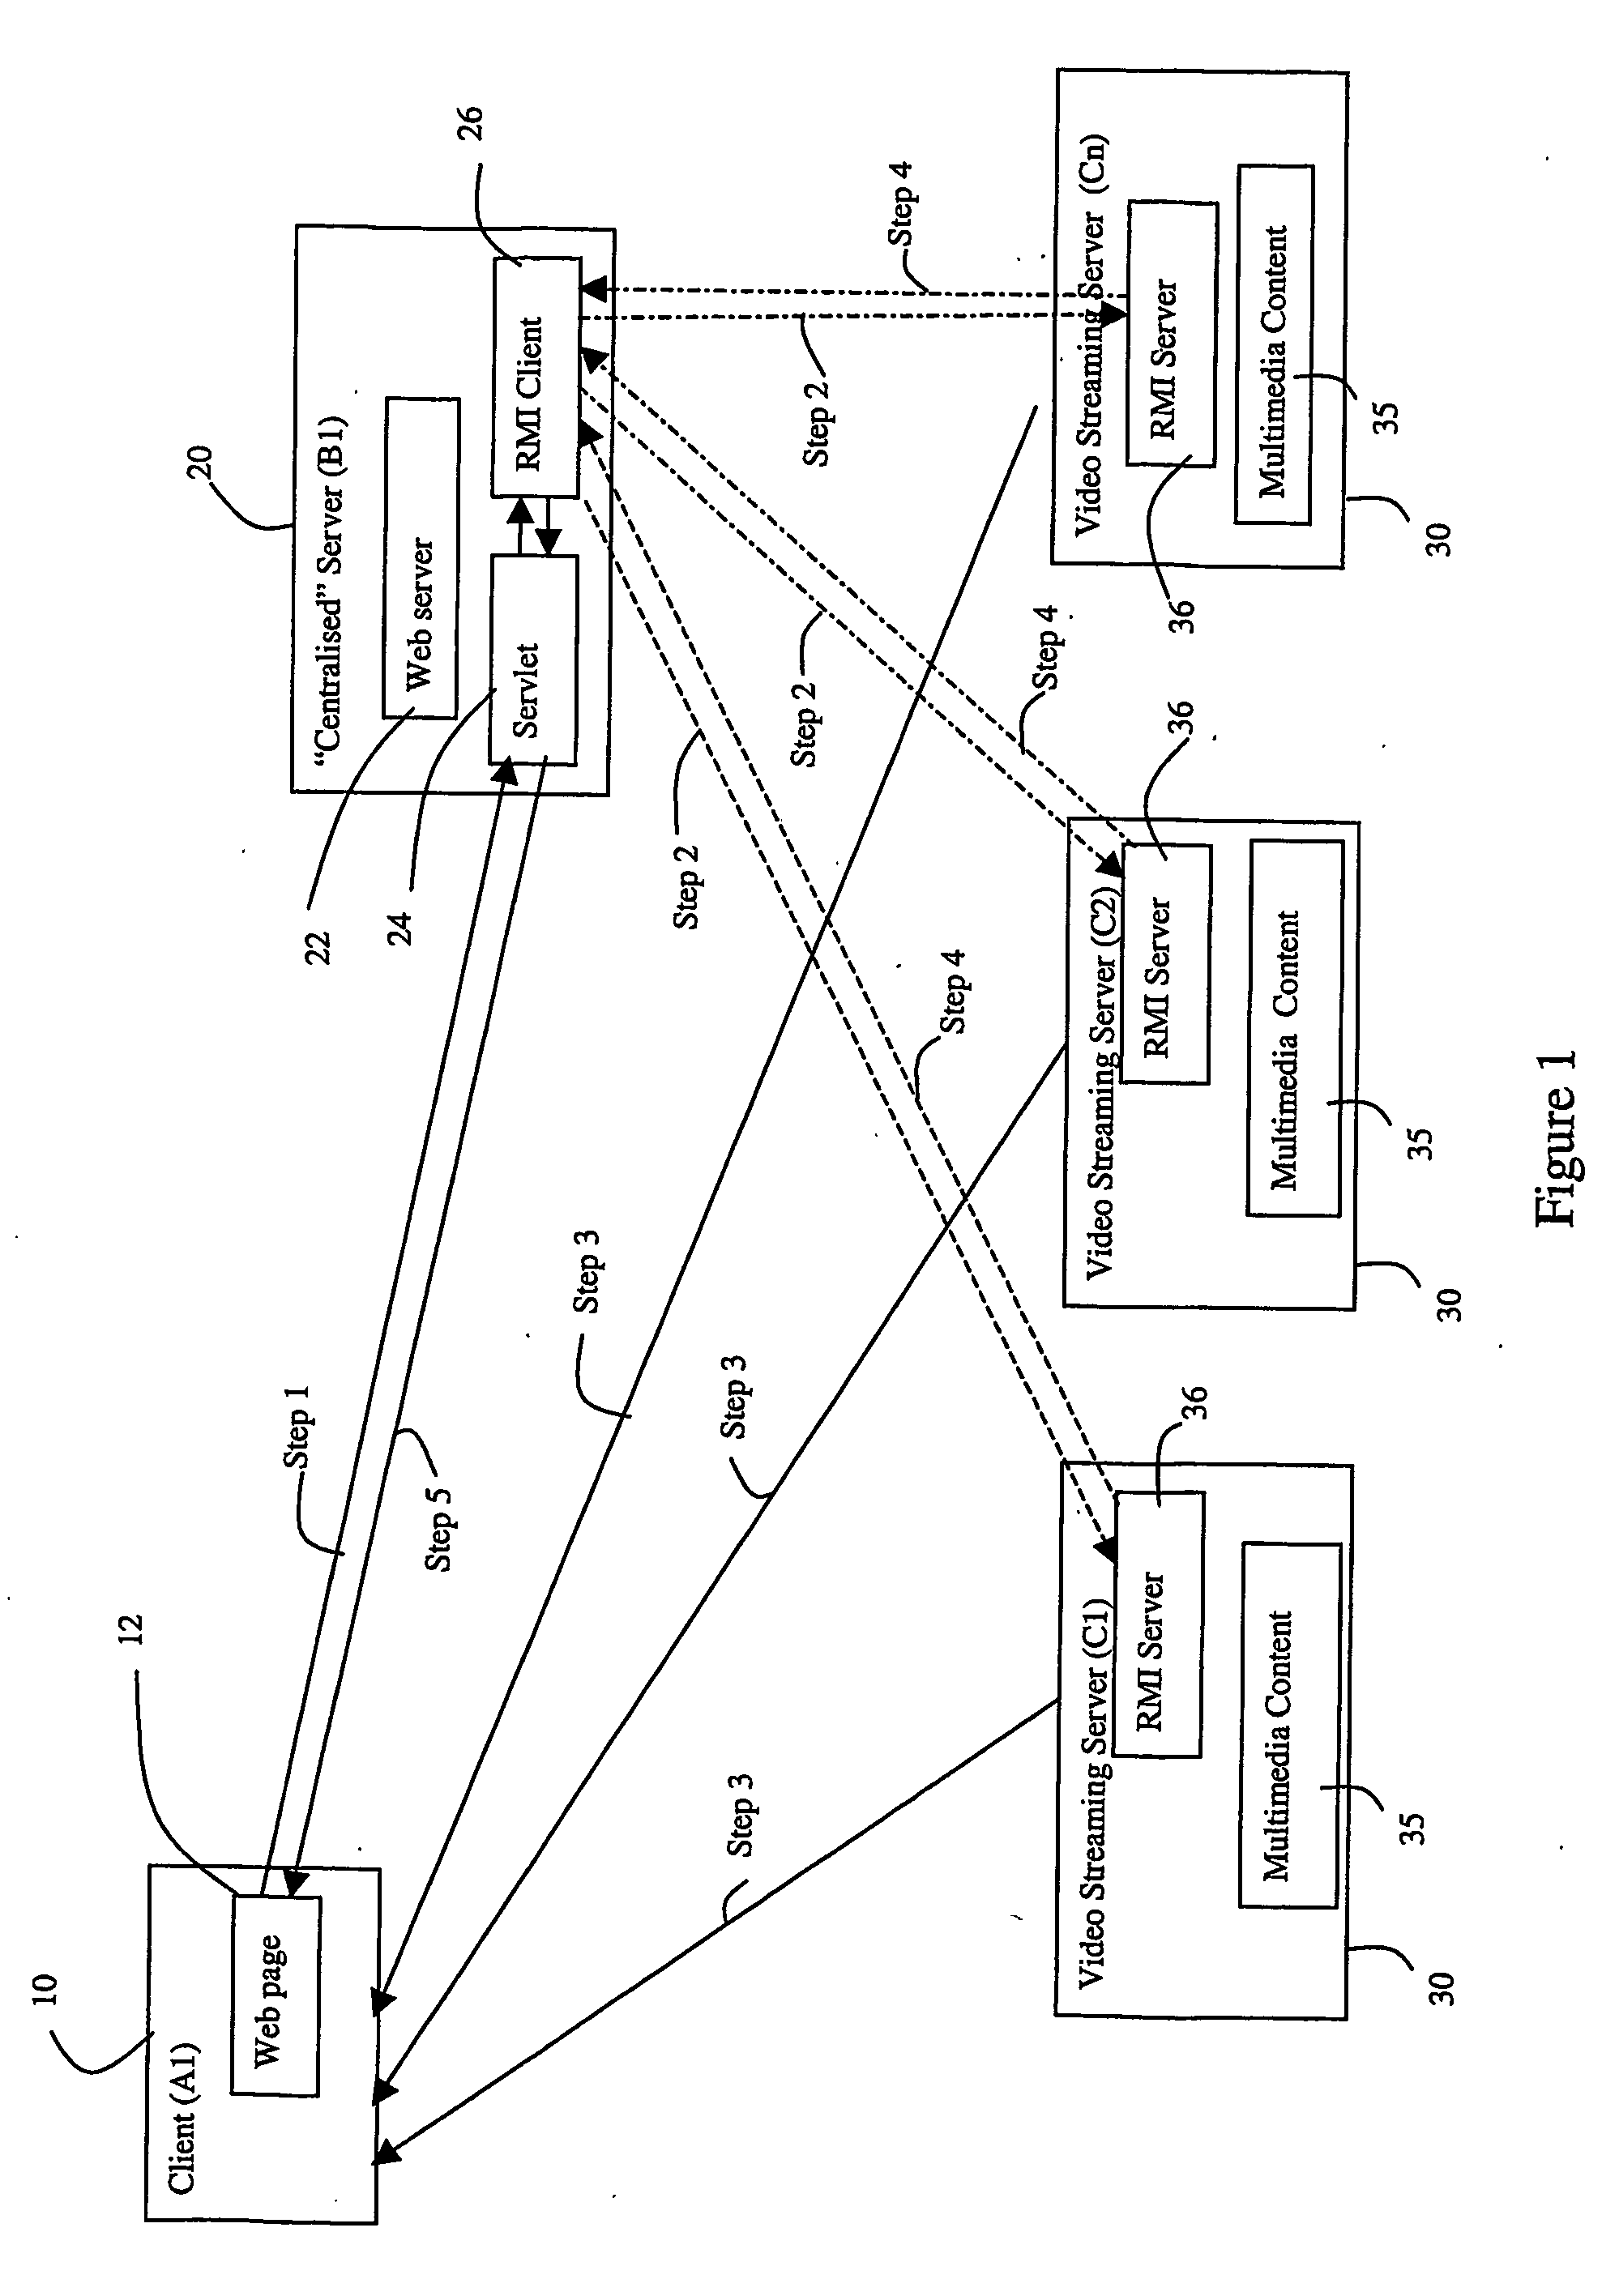 System and method for selecting data providers